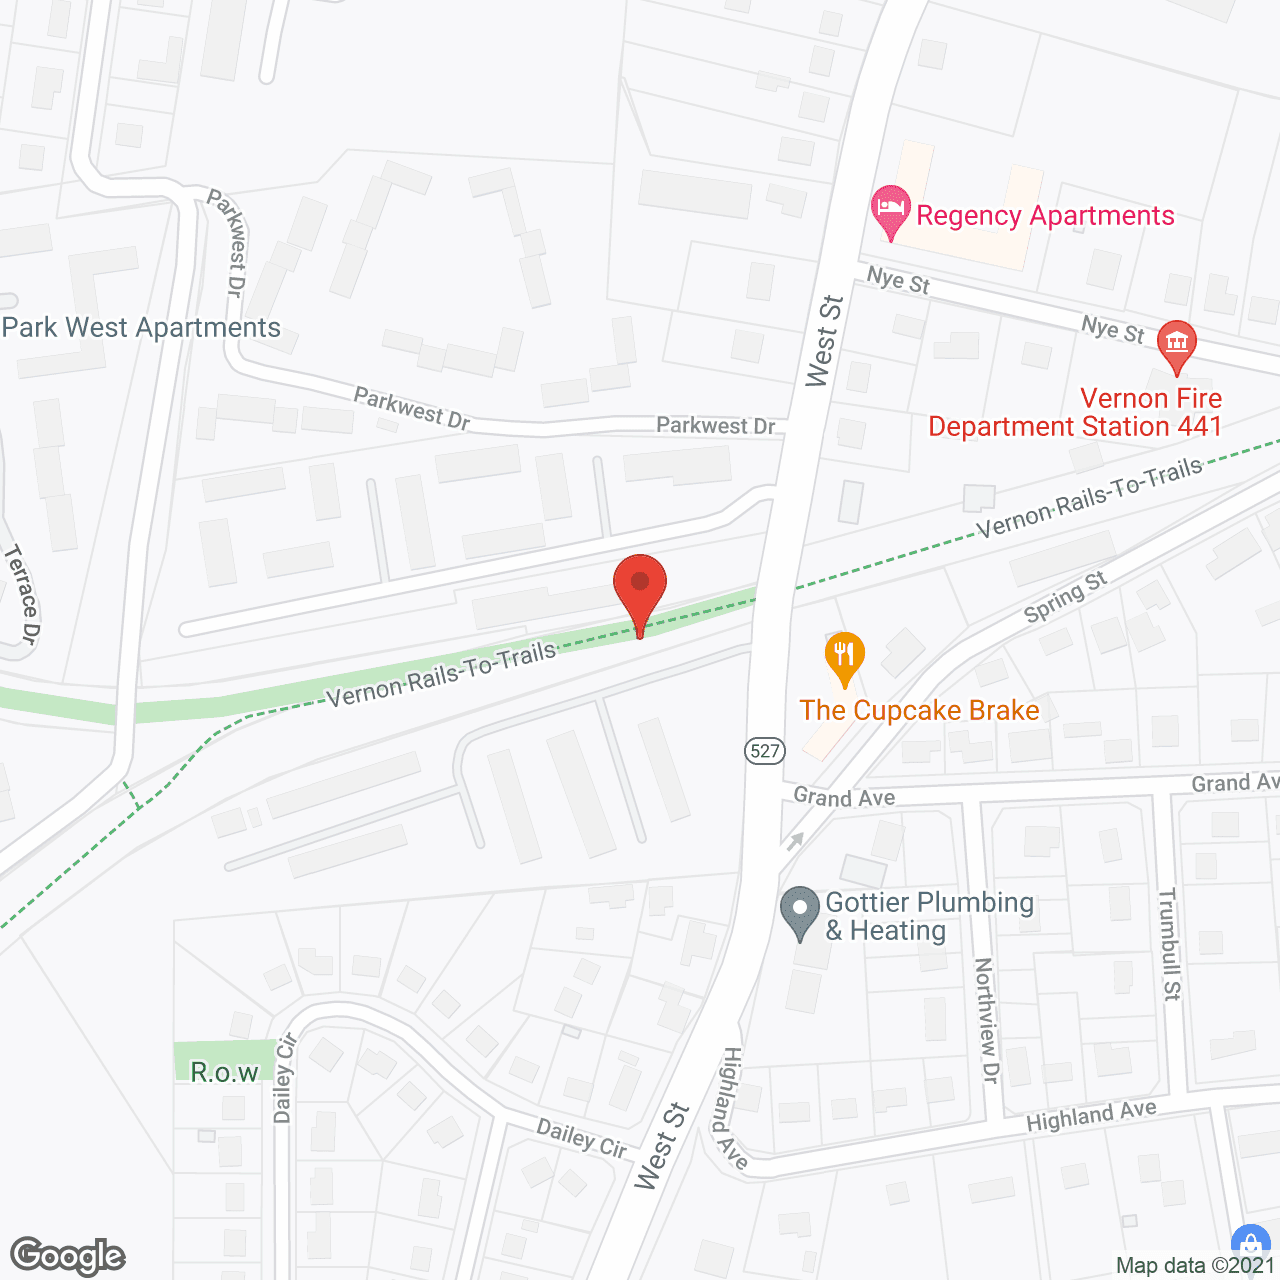 Angels Network in google map